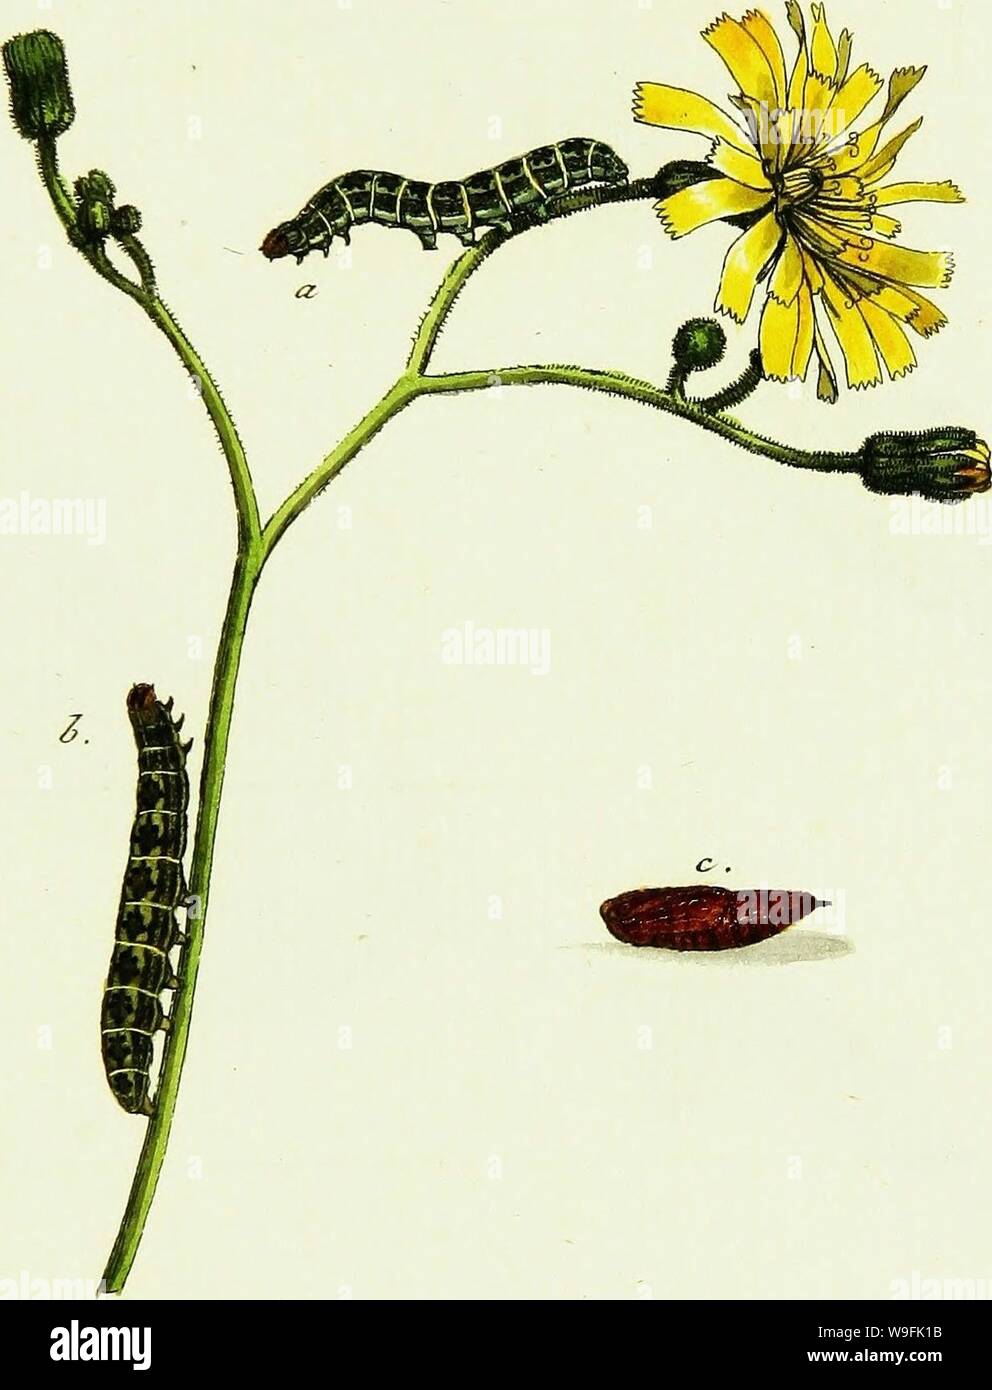 Archive image from page 48 of Geschichte europäischer Schmetterlinge (1806). Geschichte europäischer Schmetterlinge  CUbiodiversity1742385-9606 Year: 1806 ( —L ar&ce., &lt;Cvd&p€r. IK i Aoc£zu&, JT. ,j;. uirue-, -JLi. öl- .    is. 3. c-. (Je Stock Photo